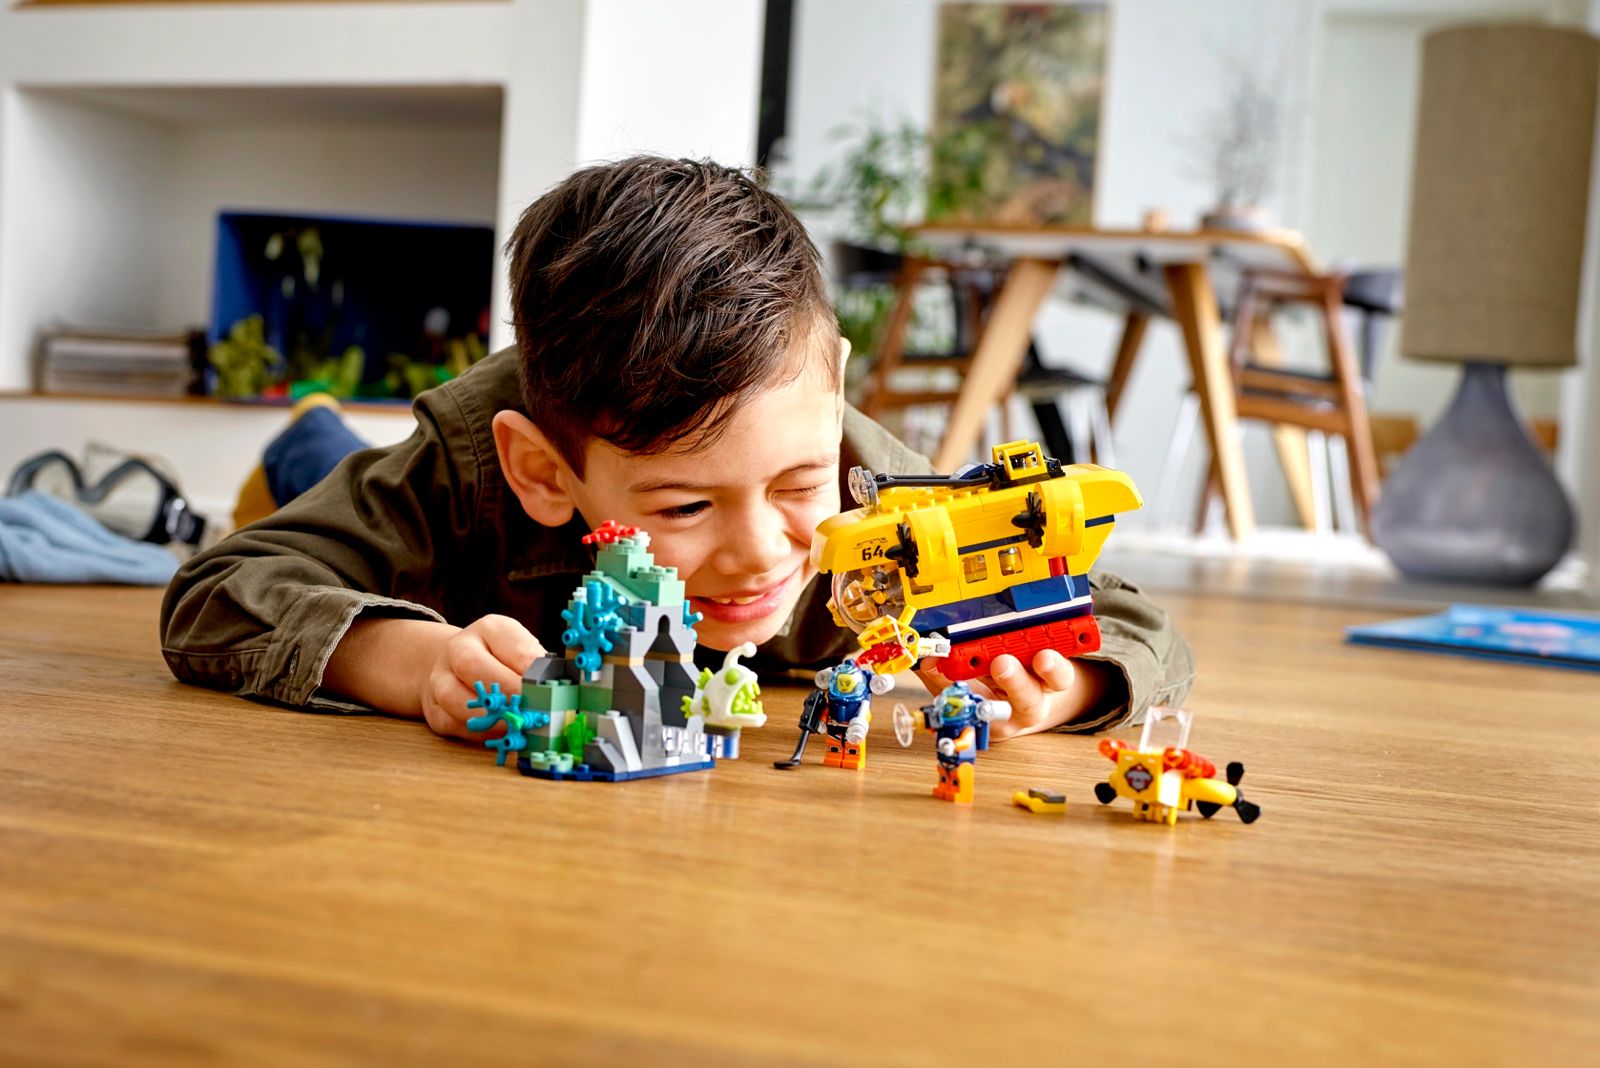 Lego teams up with National Geographic for a new batch of Lego City and Friends sets photo 1